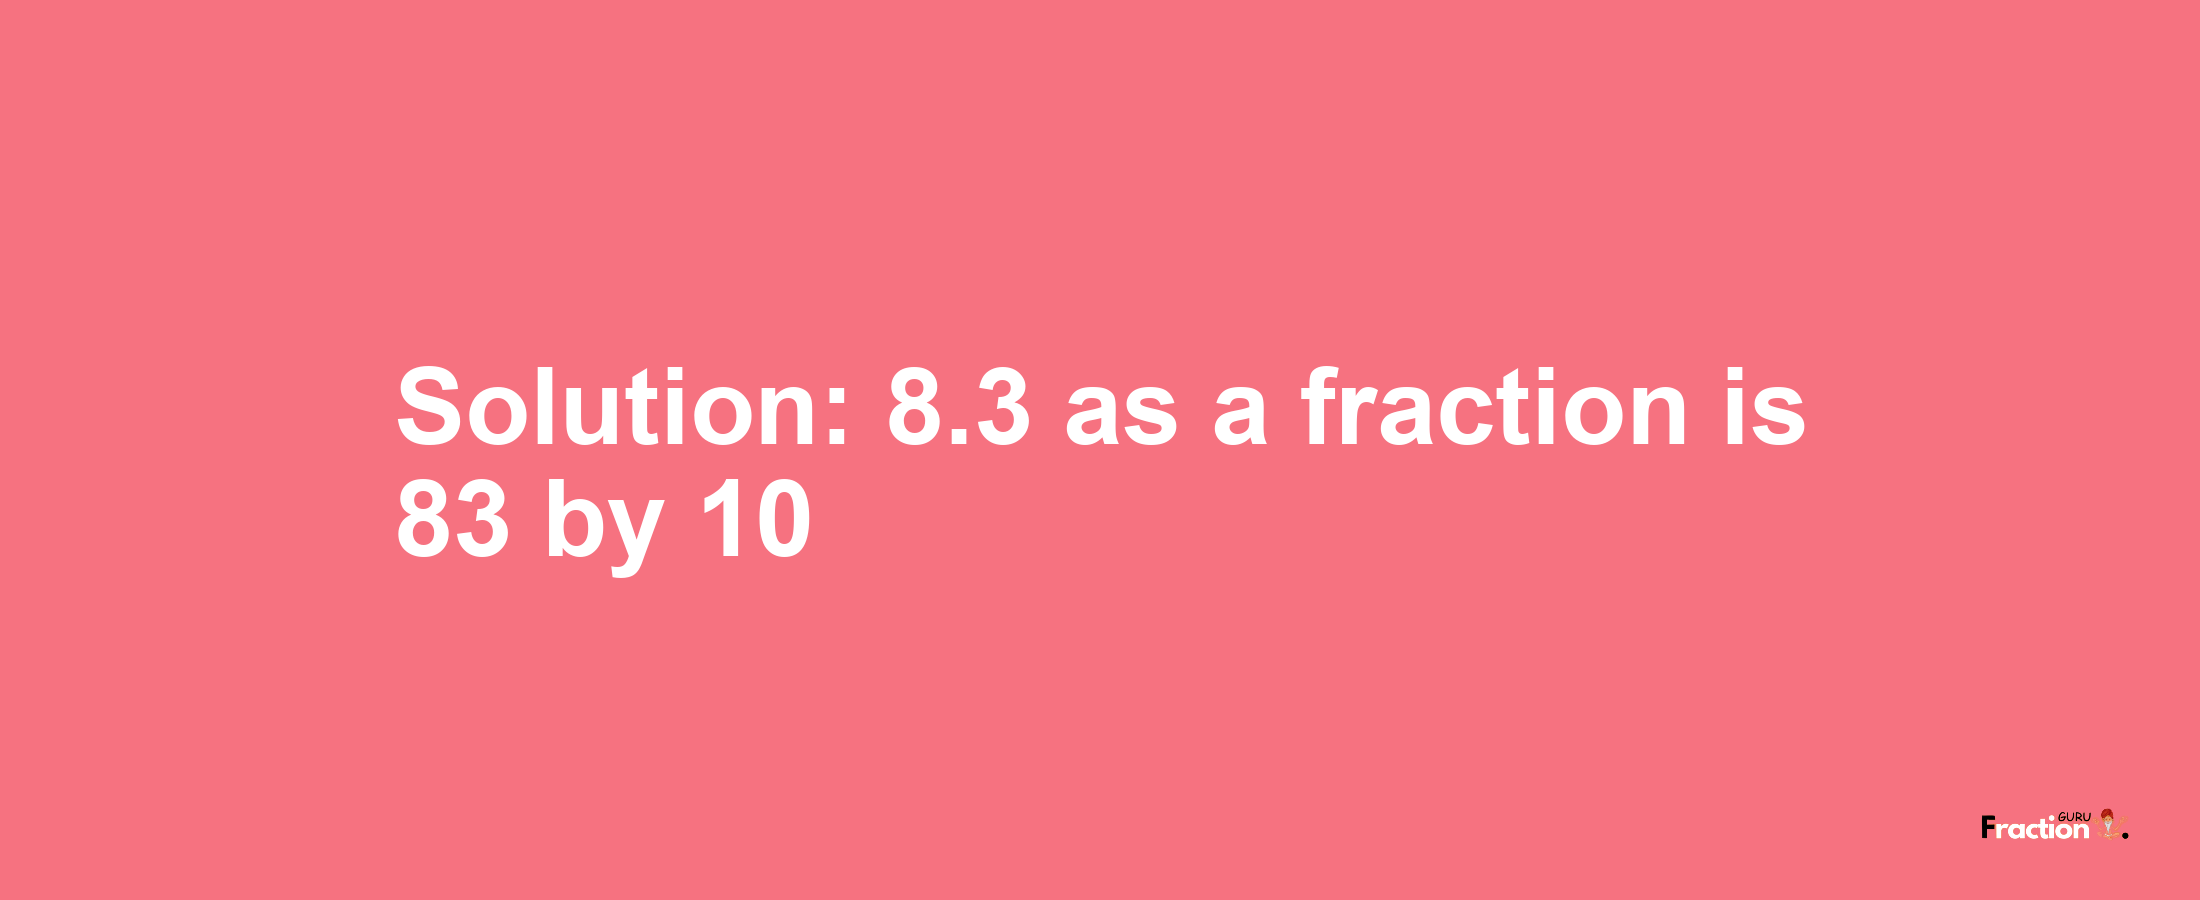 Solution:8.3 as a fraction is 83/10